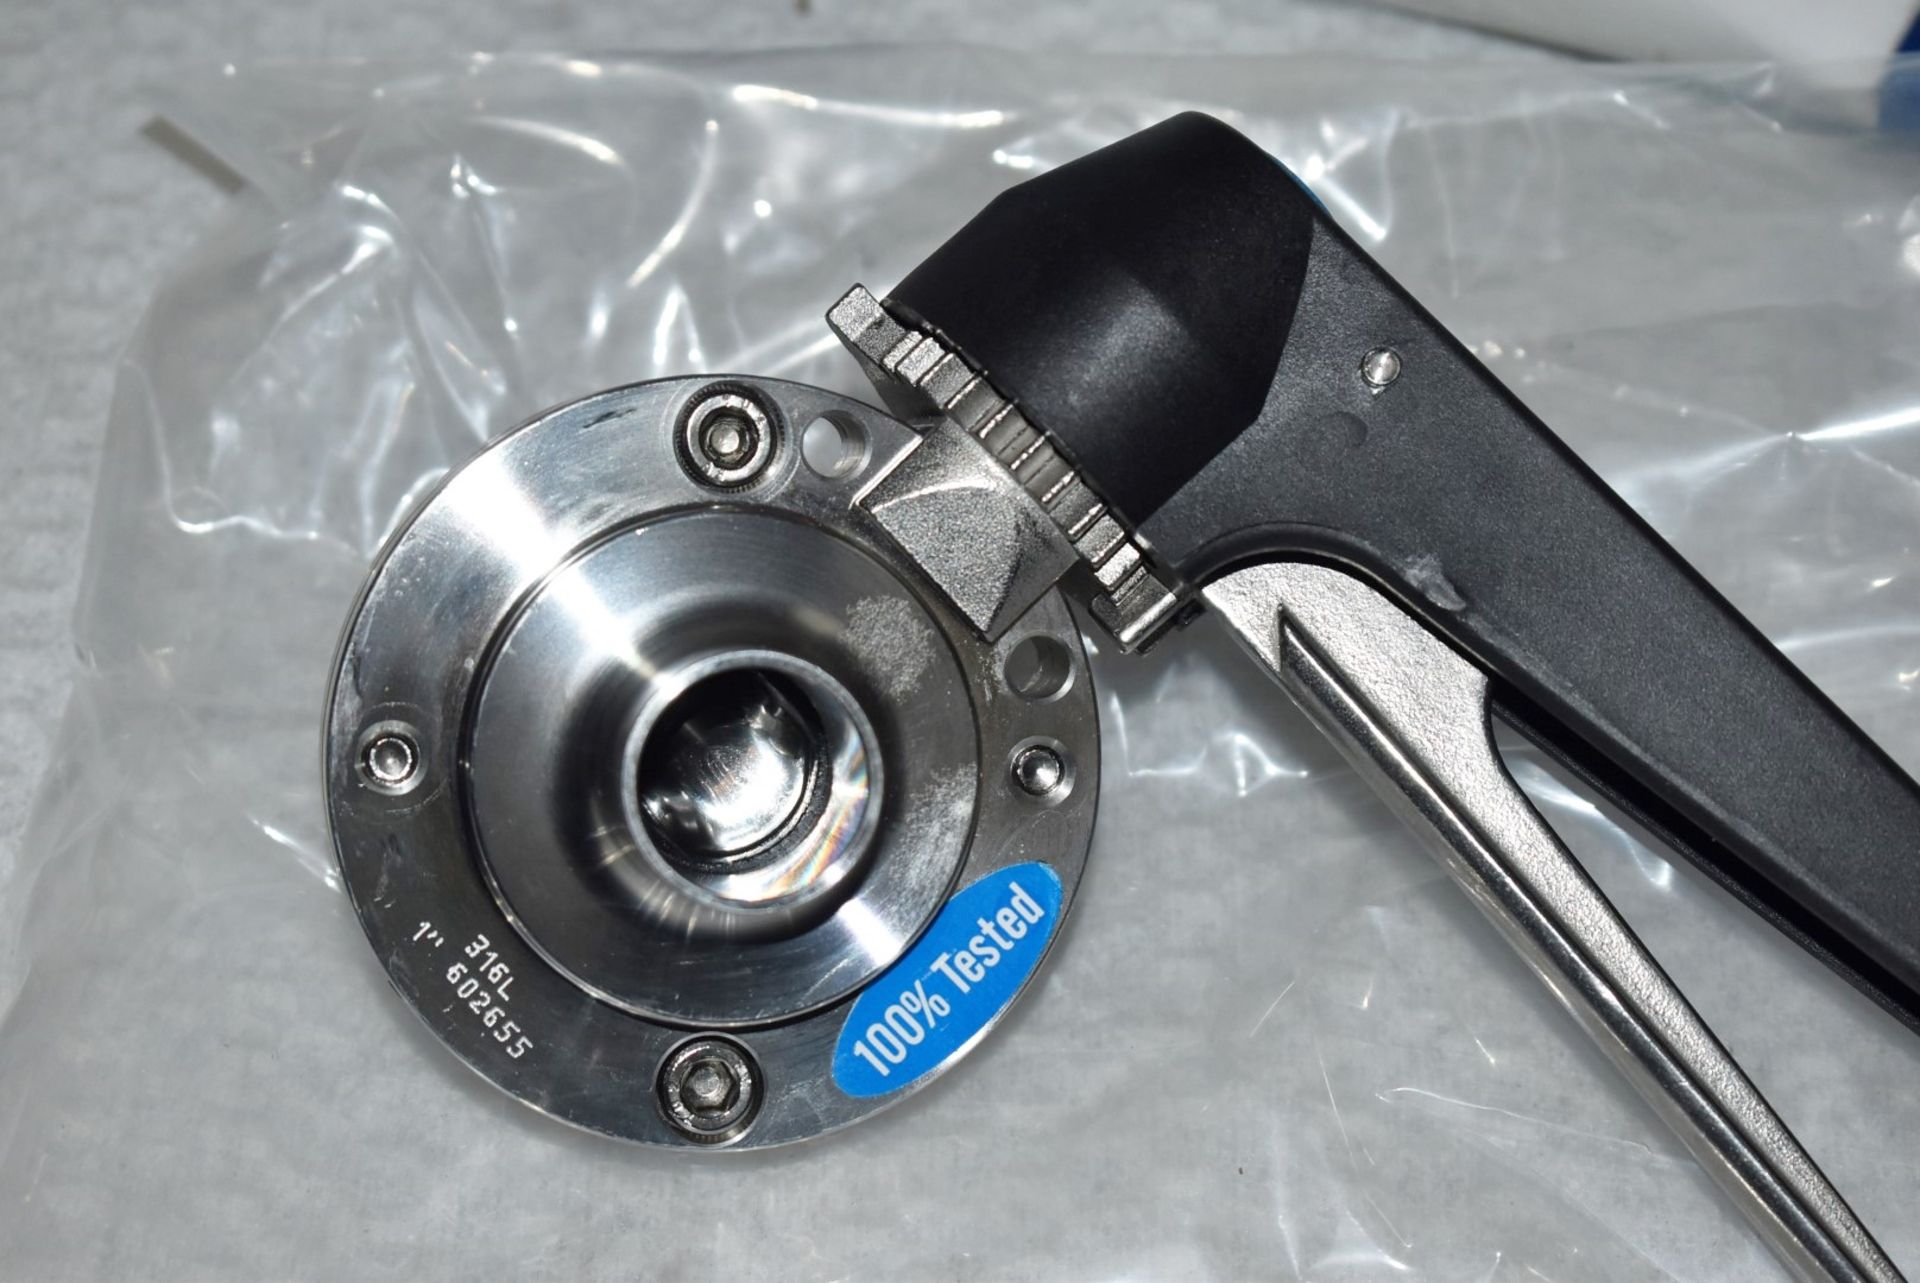 1 x Butterfly Valve - New in Original Box - Model: 3A - Material: 316L - Type: Weld - Size: 1 Inch - - Image 2 of 4